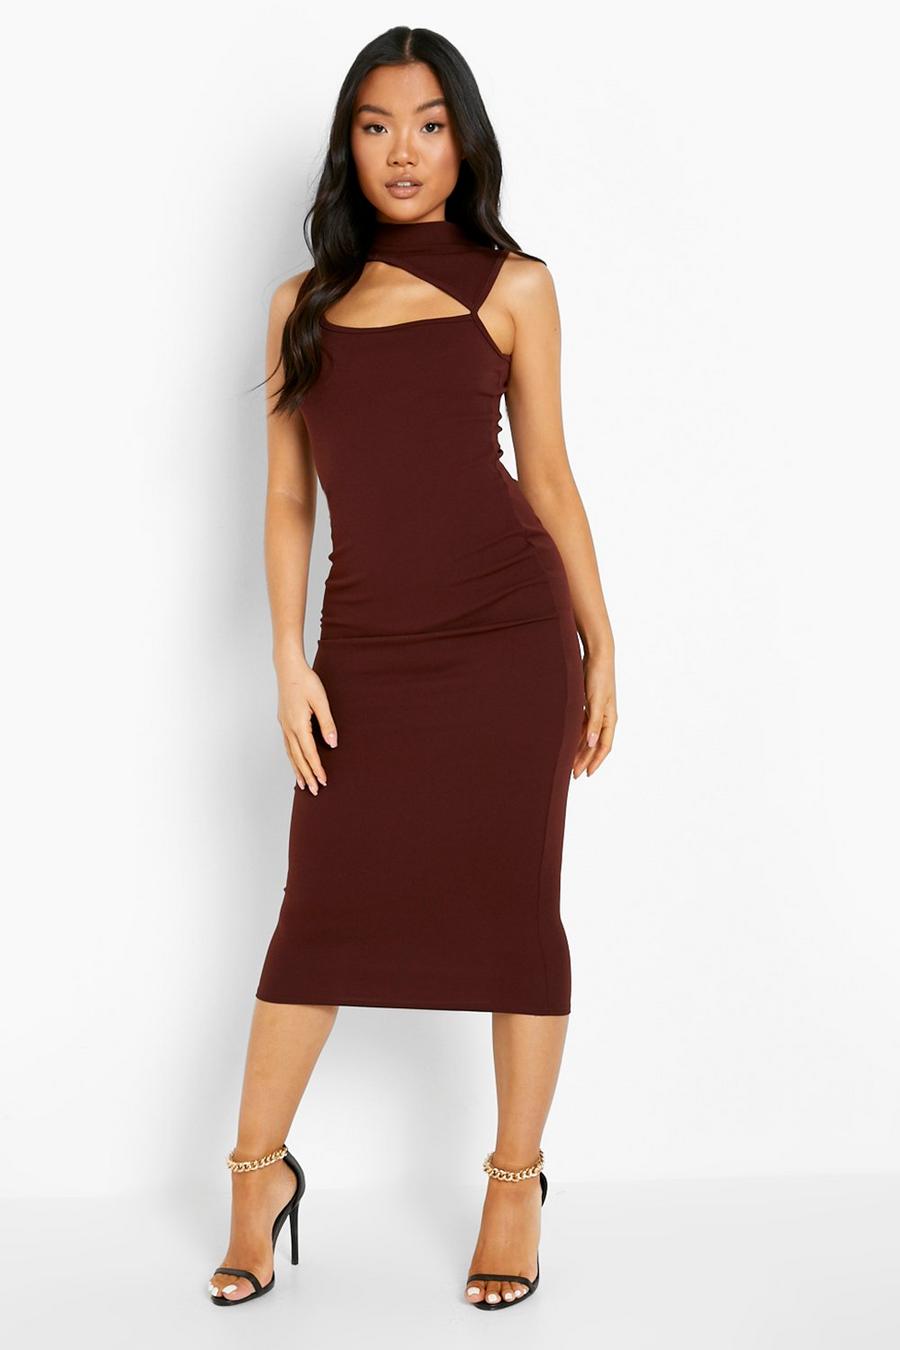 Chocolate Petite High Neck Cut Out Bodycon Midaxi Dress image number 1